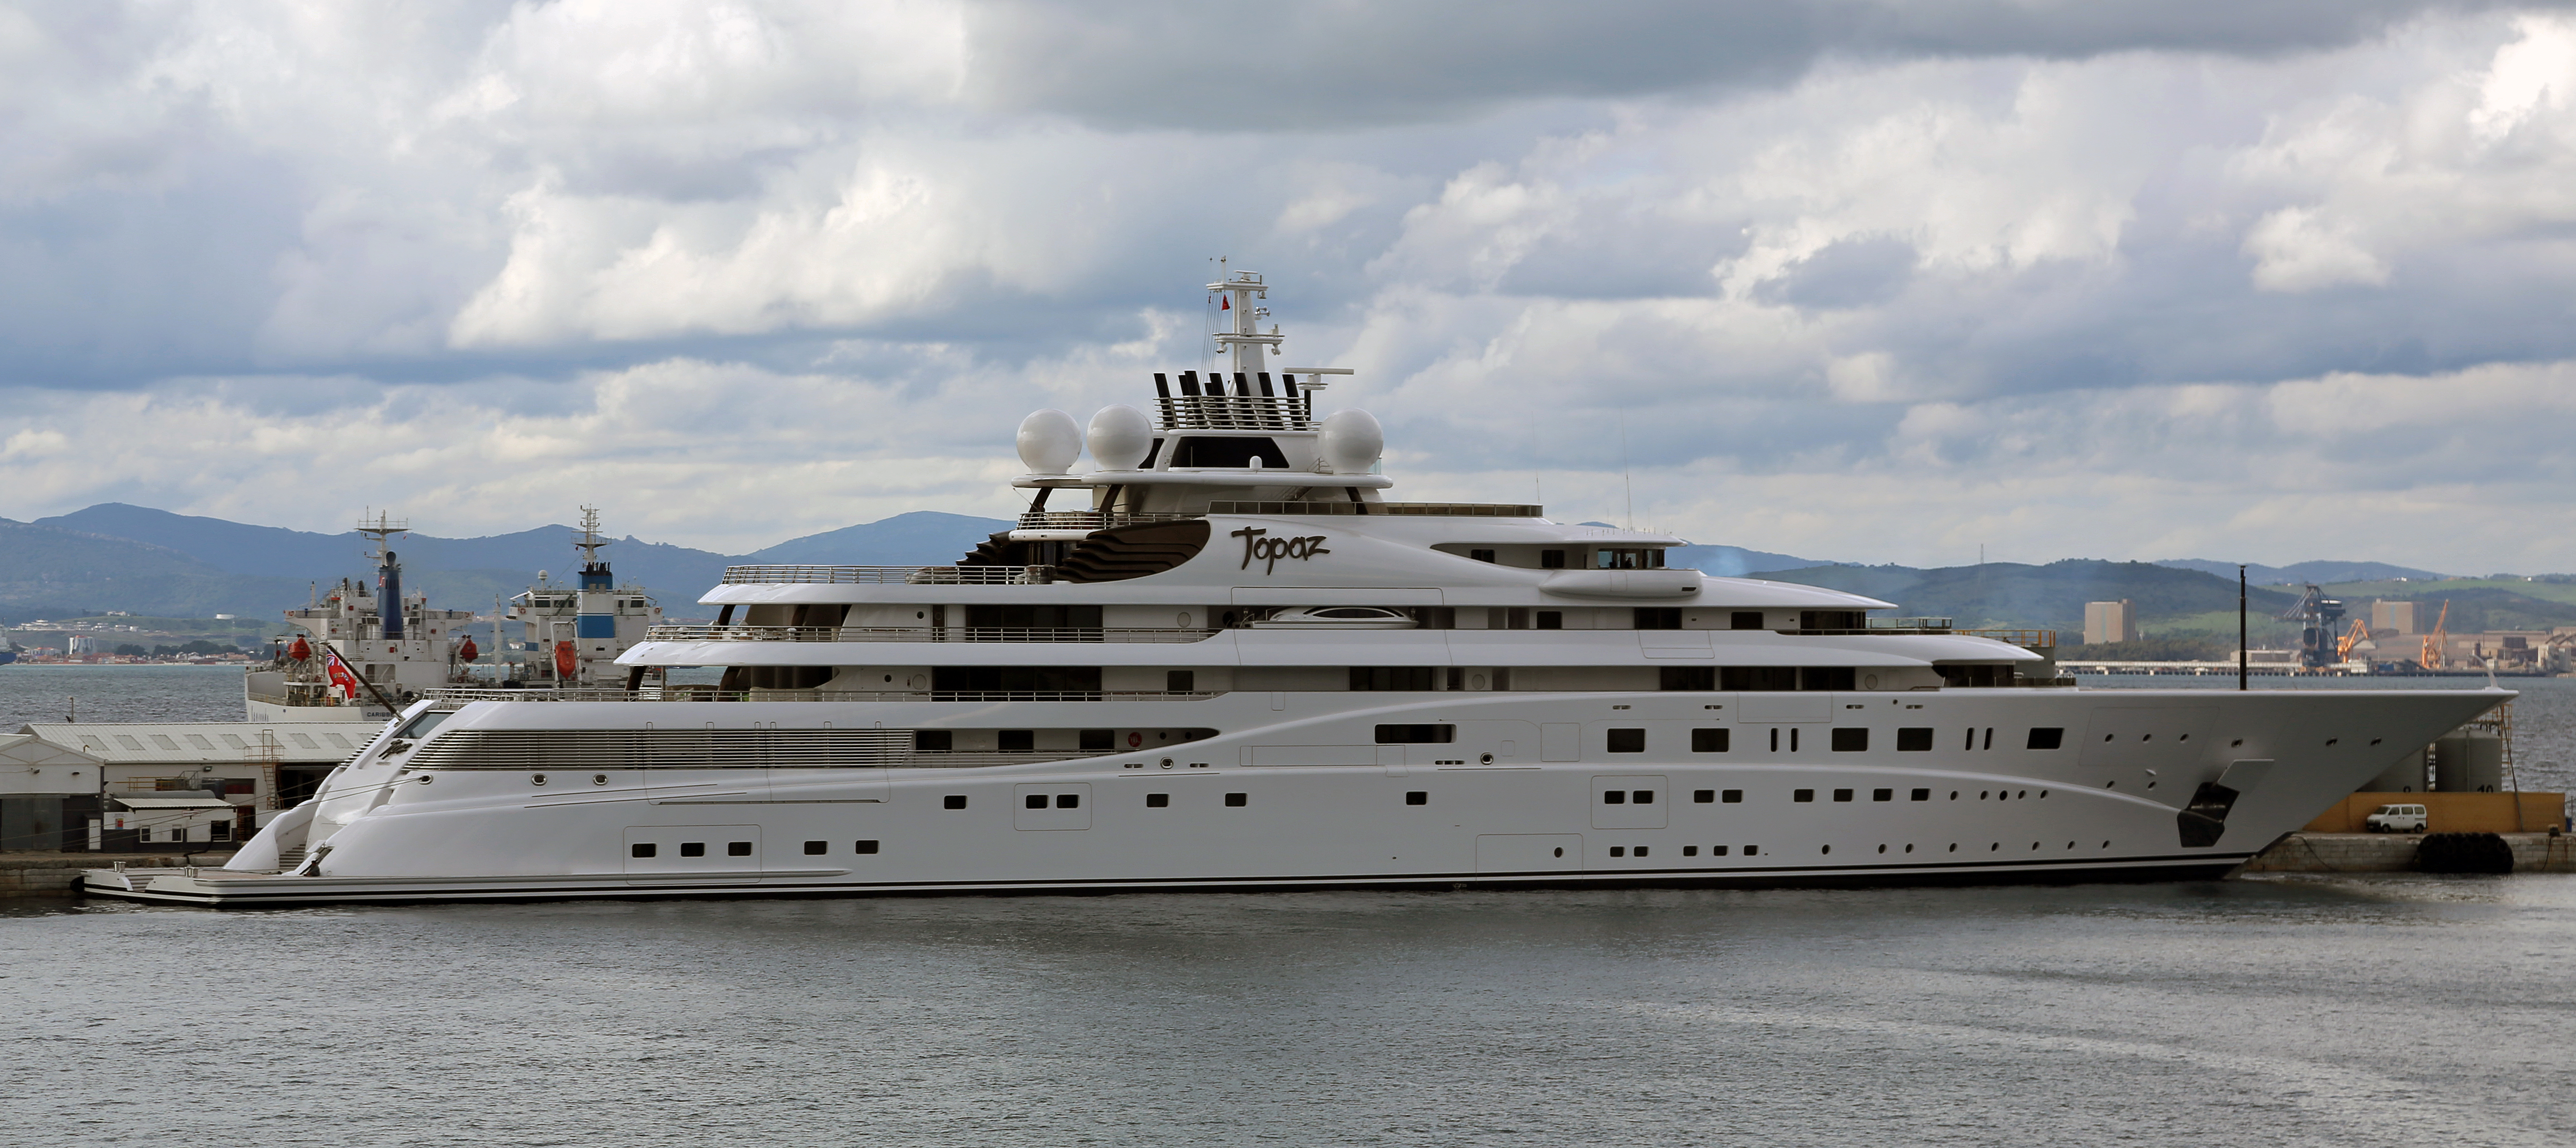 The Potential of Superyachts in Scientific Research